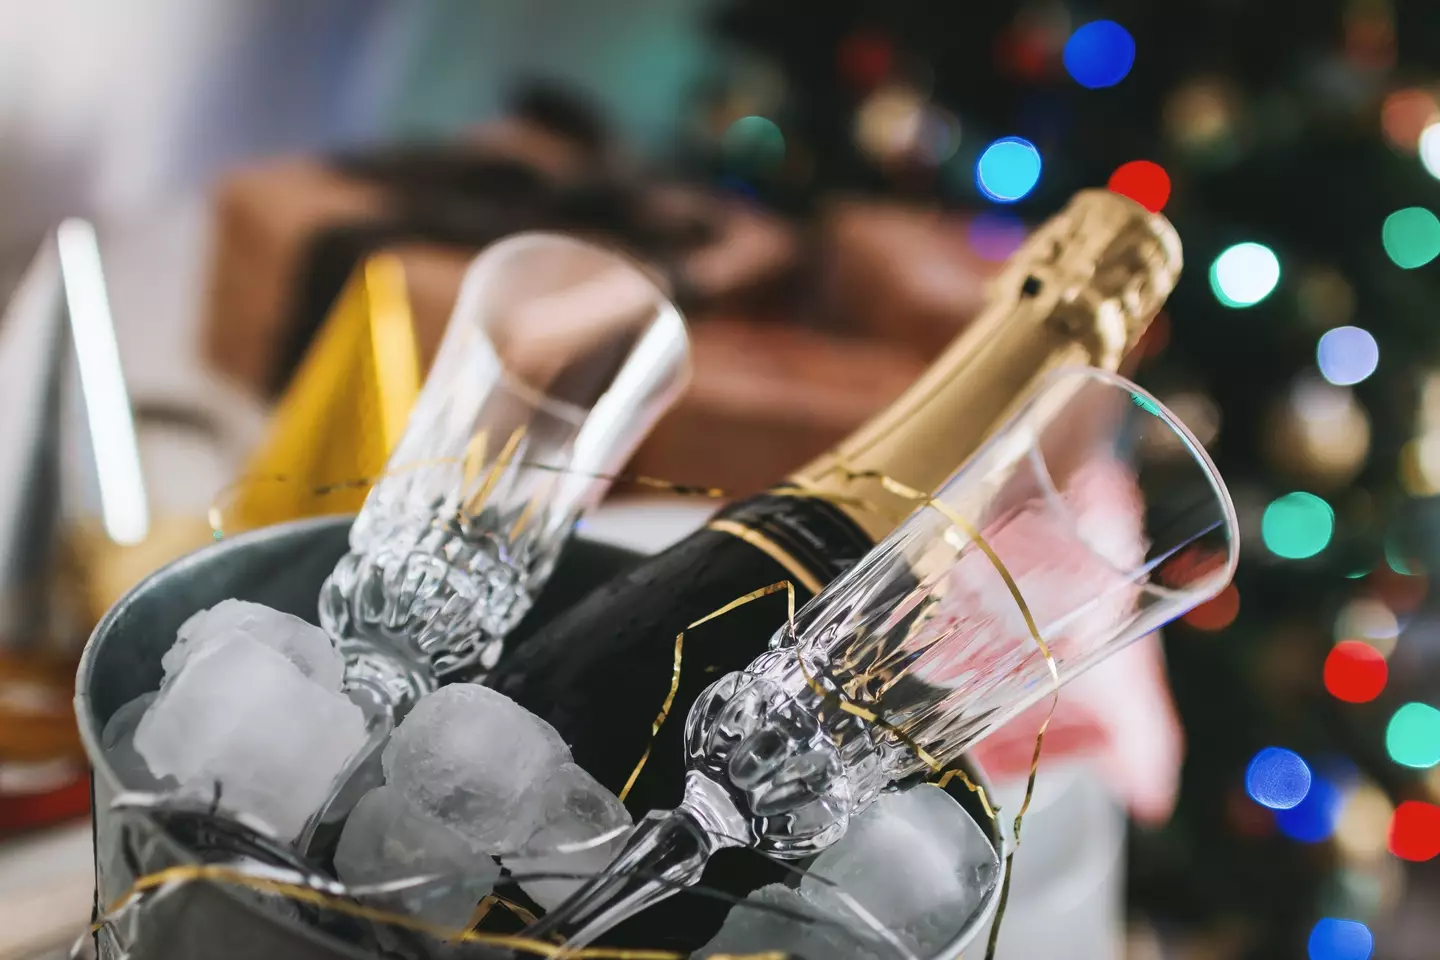 Prosecco gives the worst hangovers according to study.